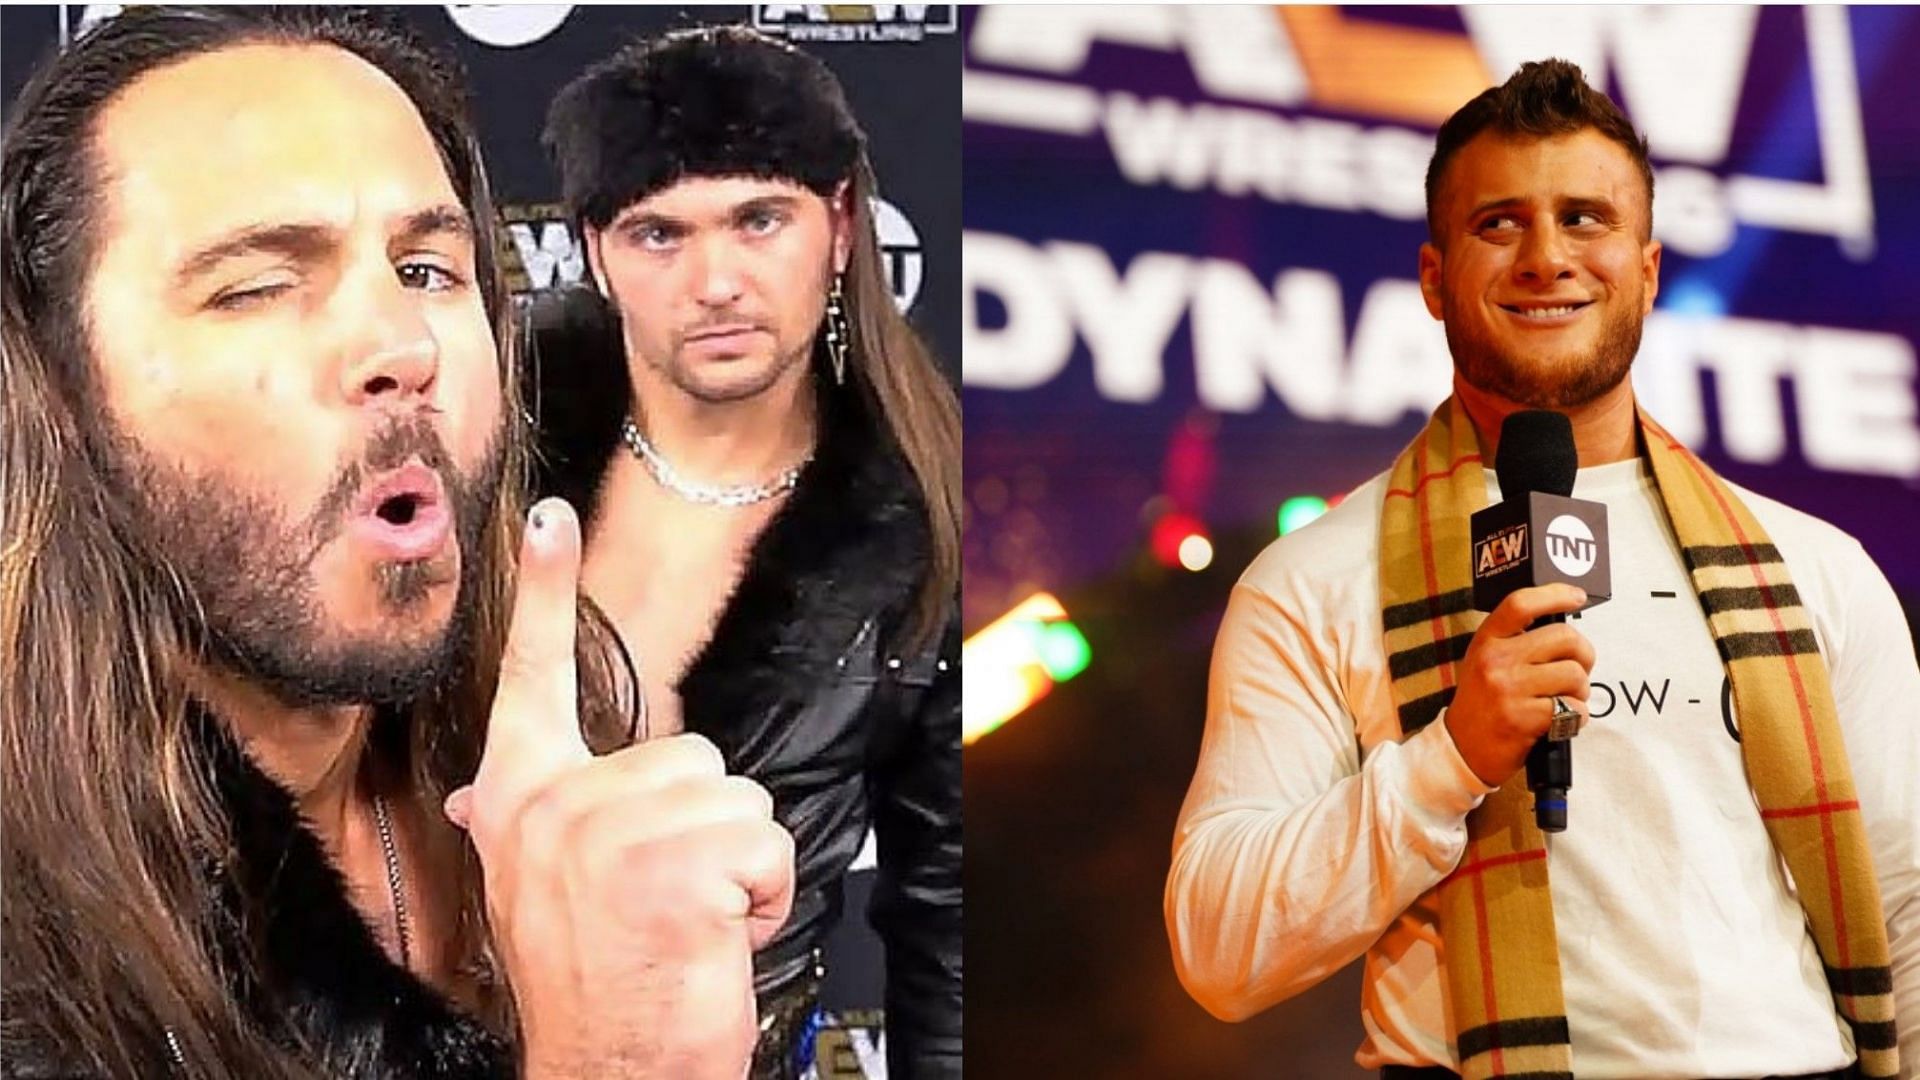 <div></noscript>4 AEW rumors we hope are true and 1 we hope aren't: Massive update on The Young Bucks' contract, WWE's interest in MJF revealed, and more</div>